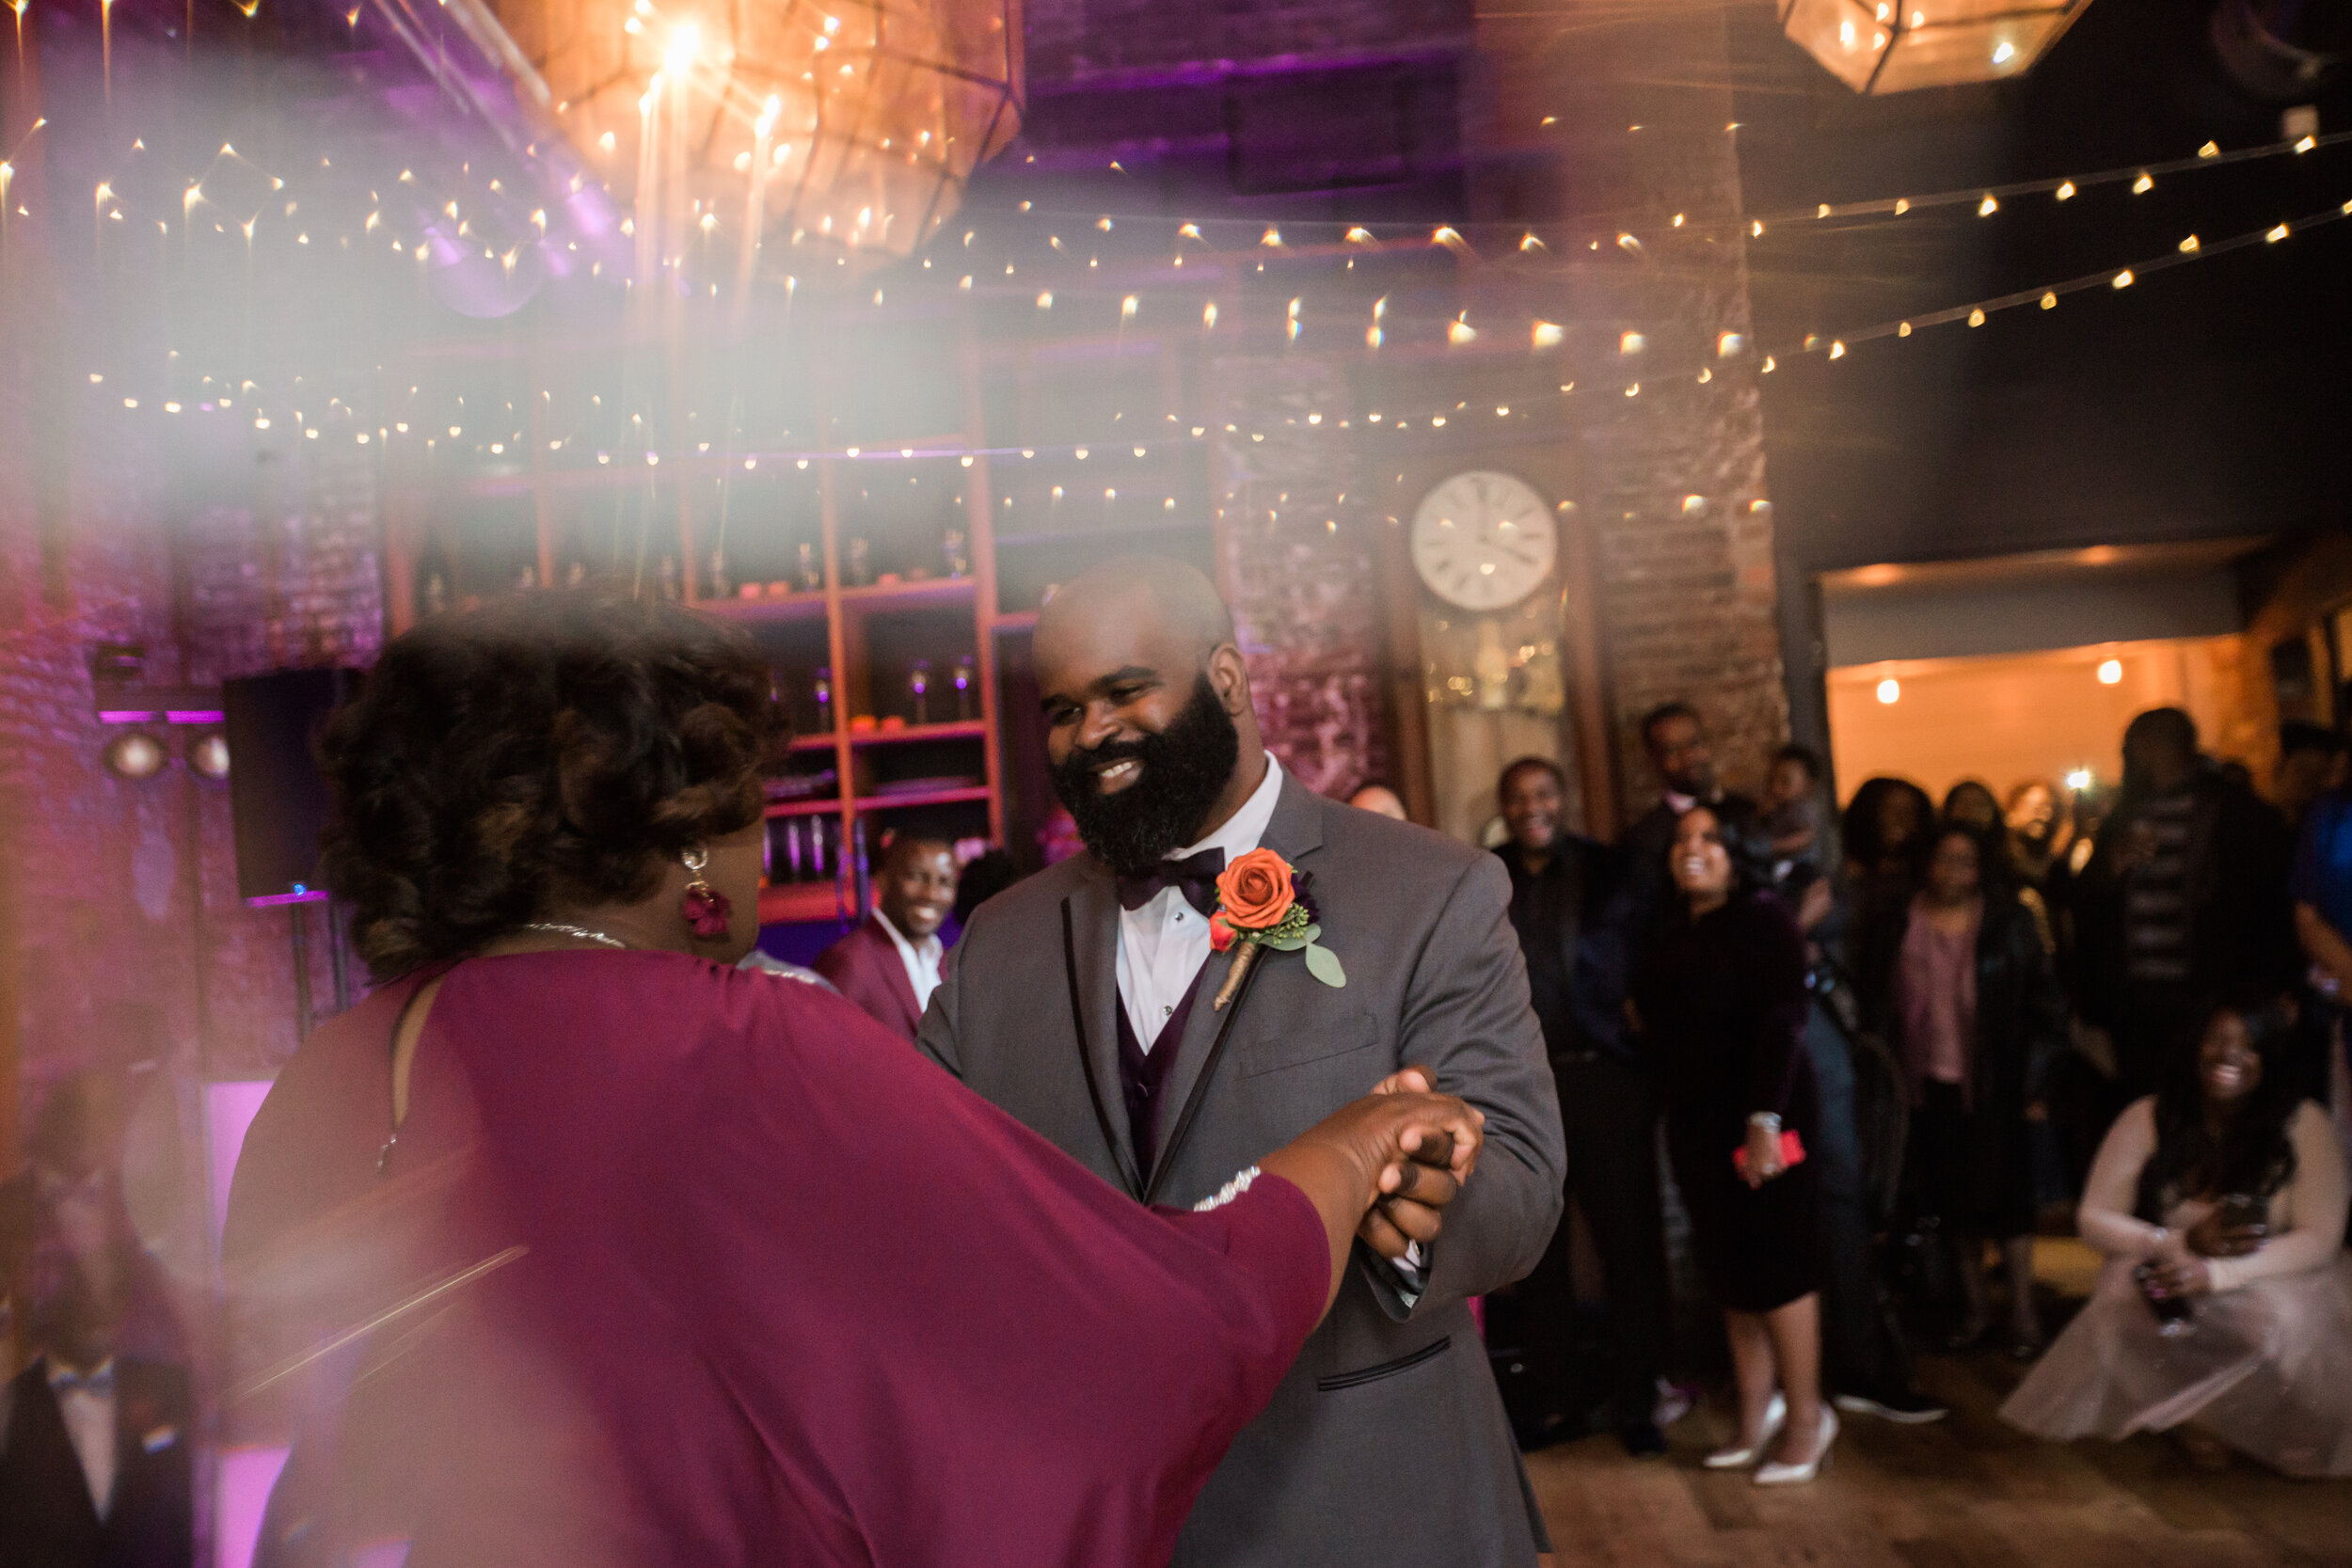 how to plan a microwedding elopement in Baltimore Maryland Wedding Photographers Megapixels Media Photography at Woodberry Kitchen Wedding Husband and Wife Photographers Black Curvy Bride (107 of 119).jpg